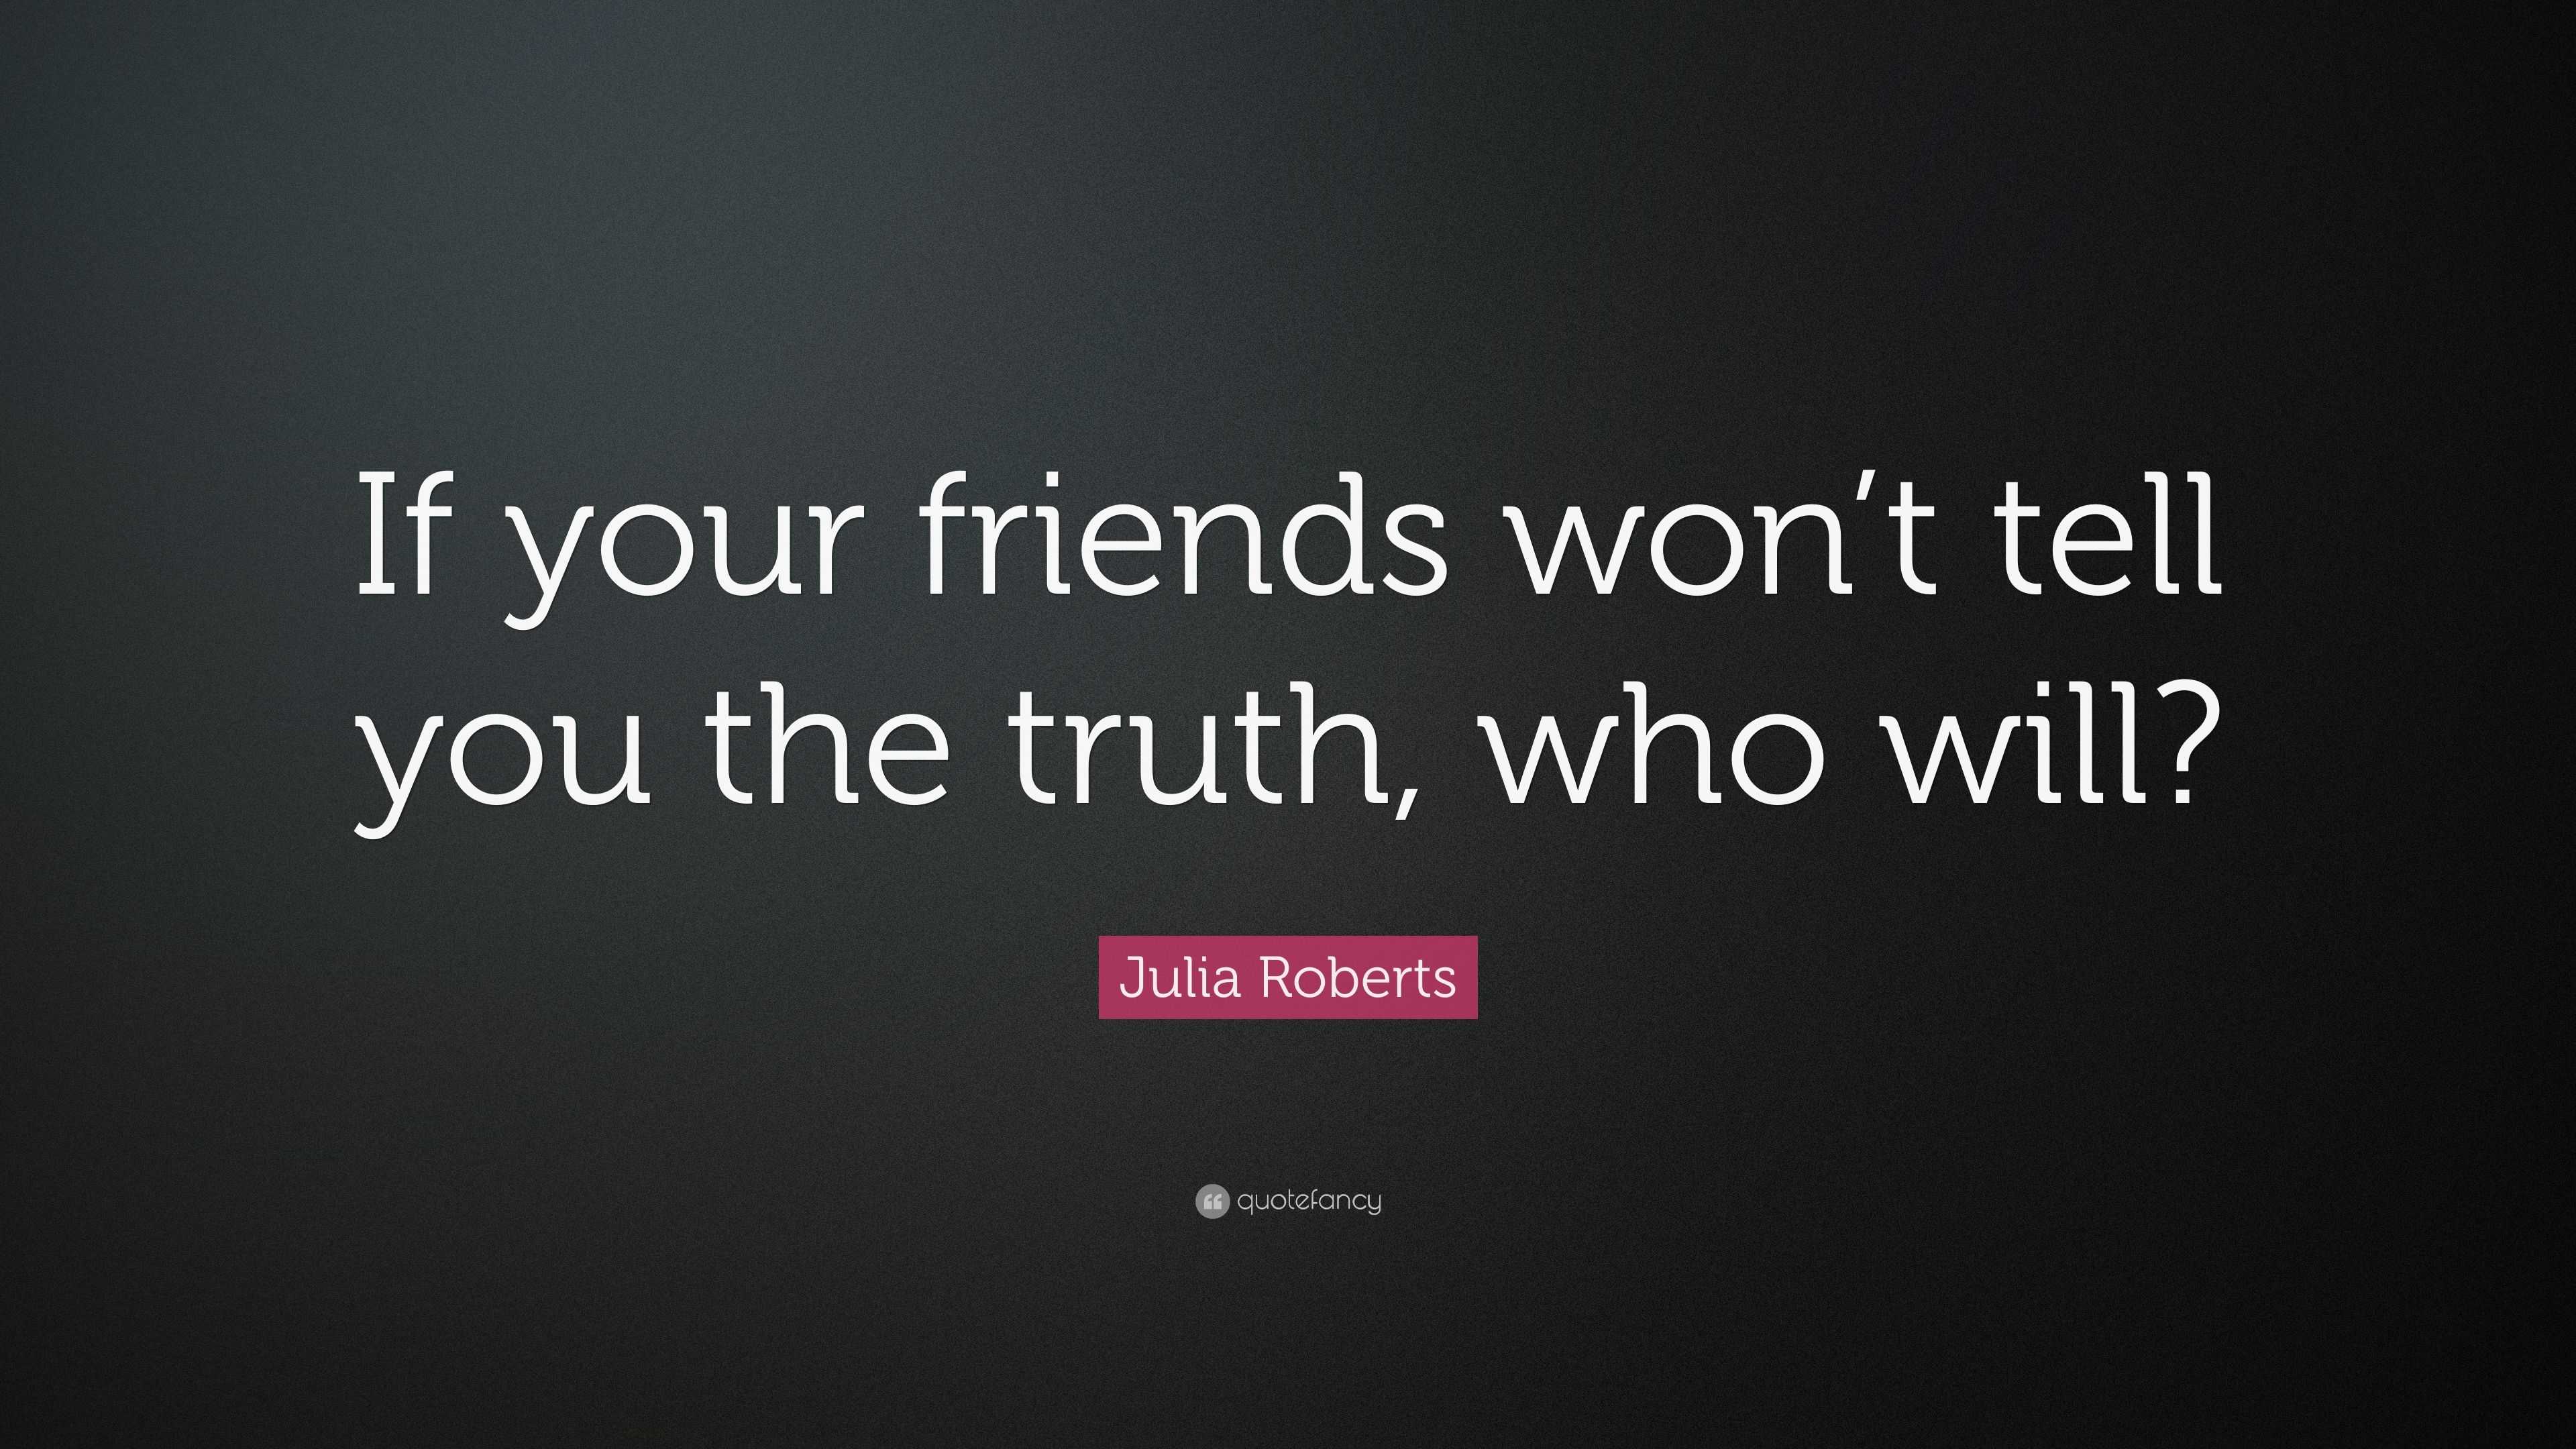 Julia Roberts Quote: “If your friends won’t tell you the truth, who will?”